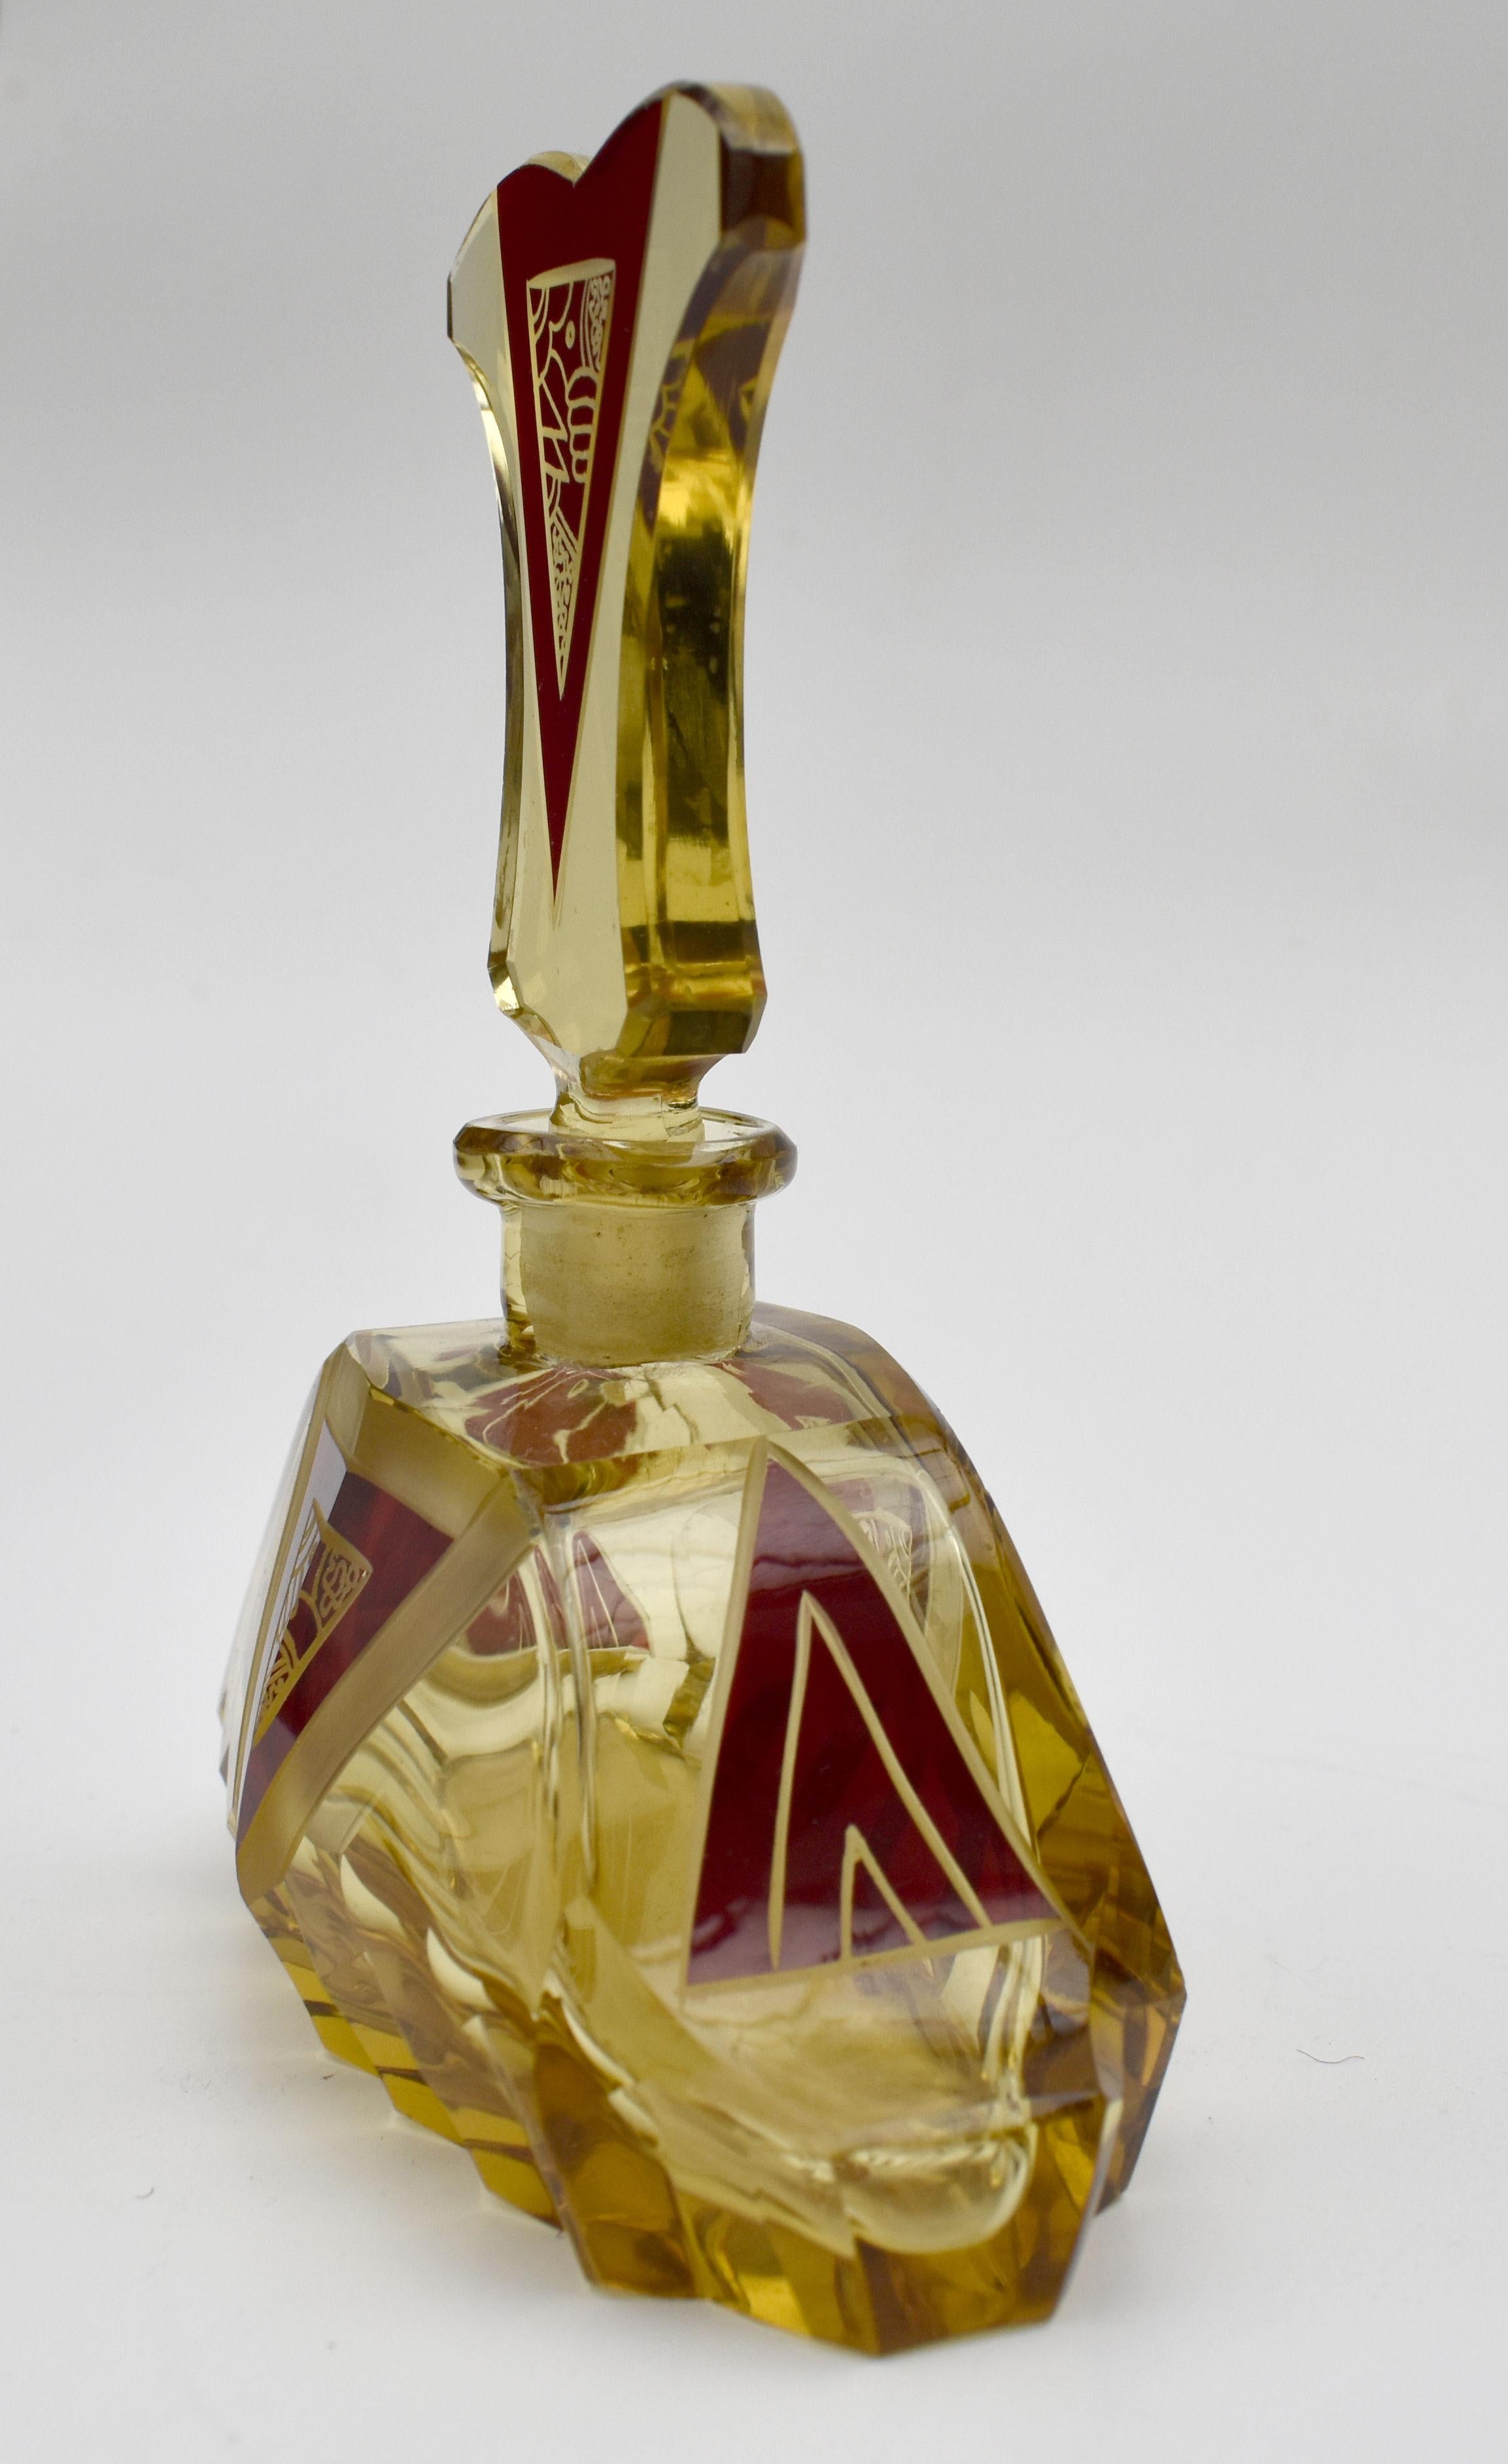 Czech Art Deco Amber Coloured Glass Perfume Bottle by Karl Palda, c1930s For Sale